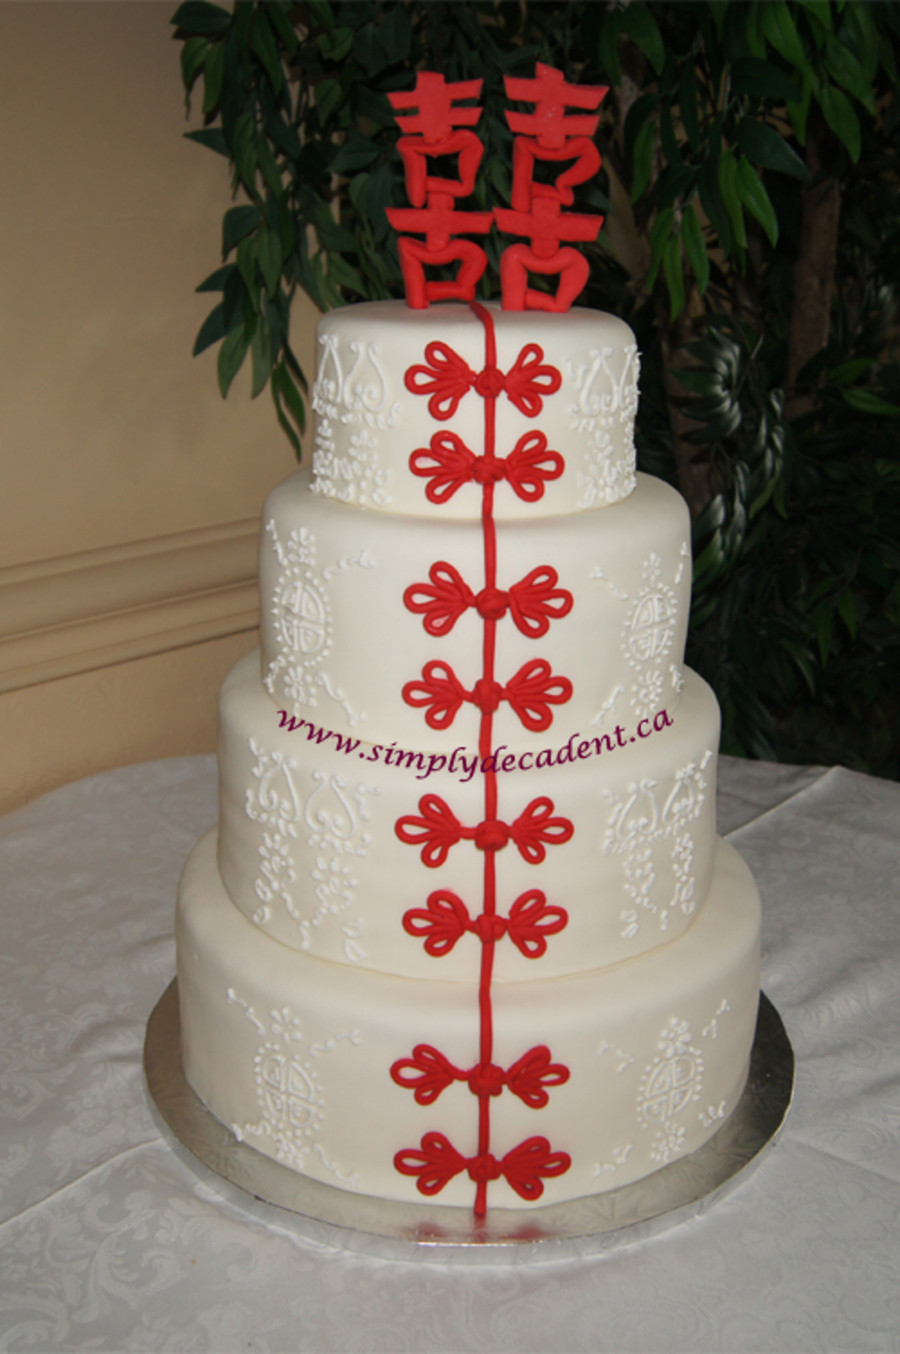 Asian Wedding Cakes
 Double Happiness Chinese Wedding Cake CakeCentral